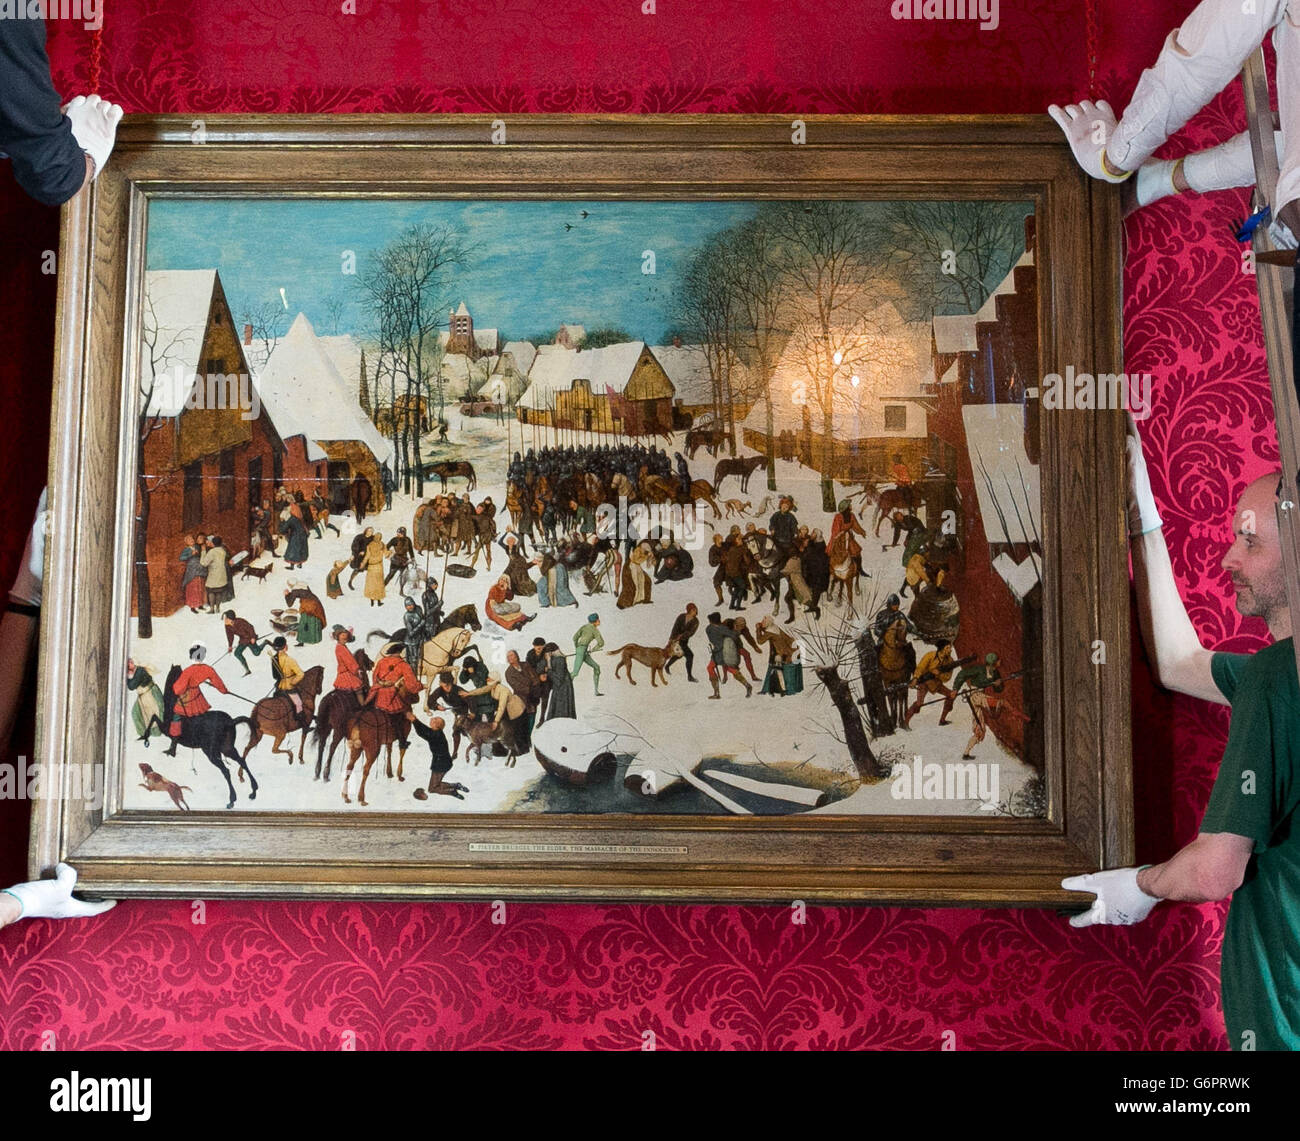 Pieter Bruegel the Elder's 16th-century masterpiece, Massacre of the Innocents, is hung in the King's Dressing Room at Windsor Castle as part of a new picture hang in the State Apartments. Stock Photo